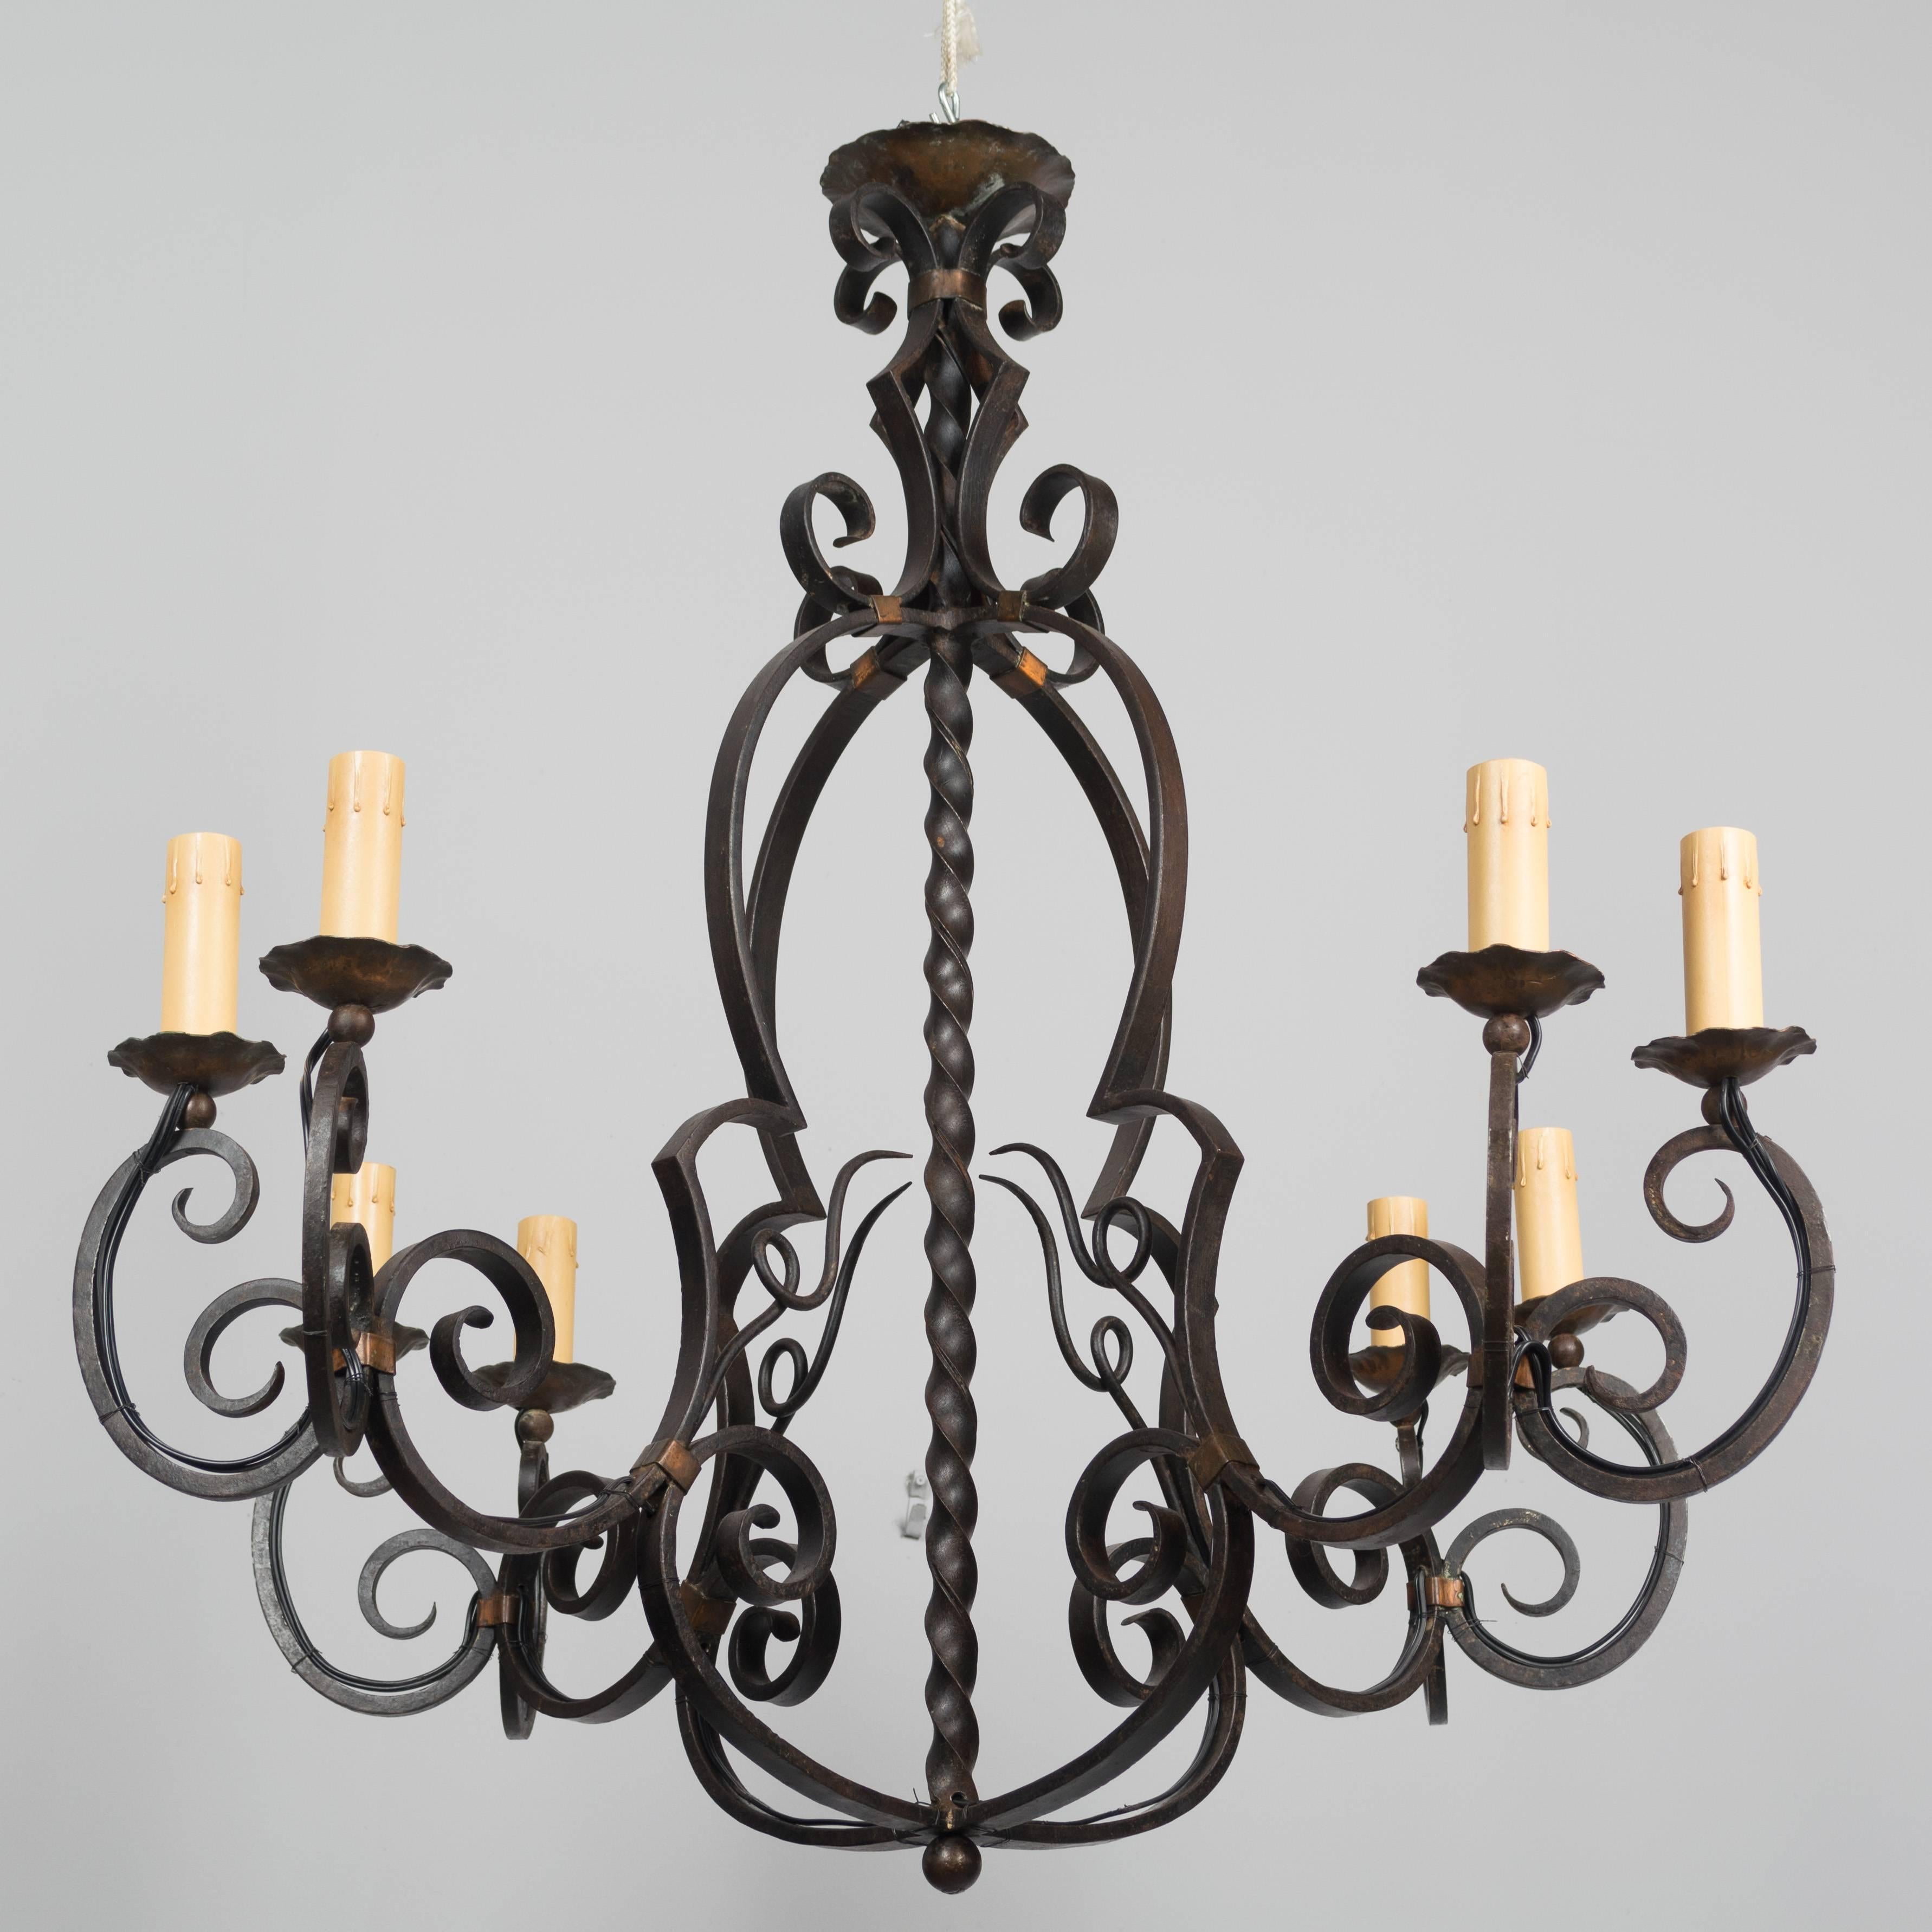 A large French eight light wrought iron chandelier. Beautifully crafted iron work and nice old patina with the bobeches and binding made of copper. Rewired.
More photos available upon request. We have a large selection of French antiques. Please